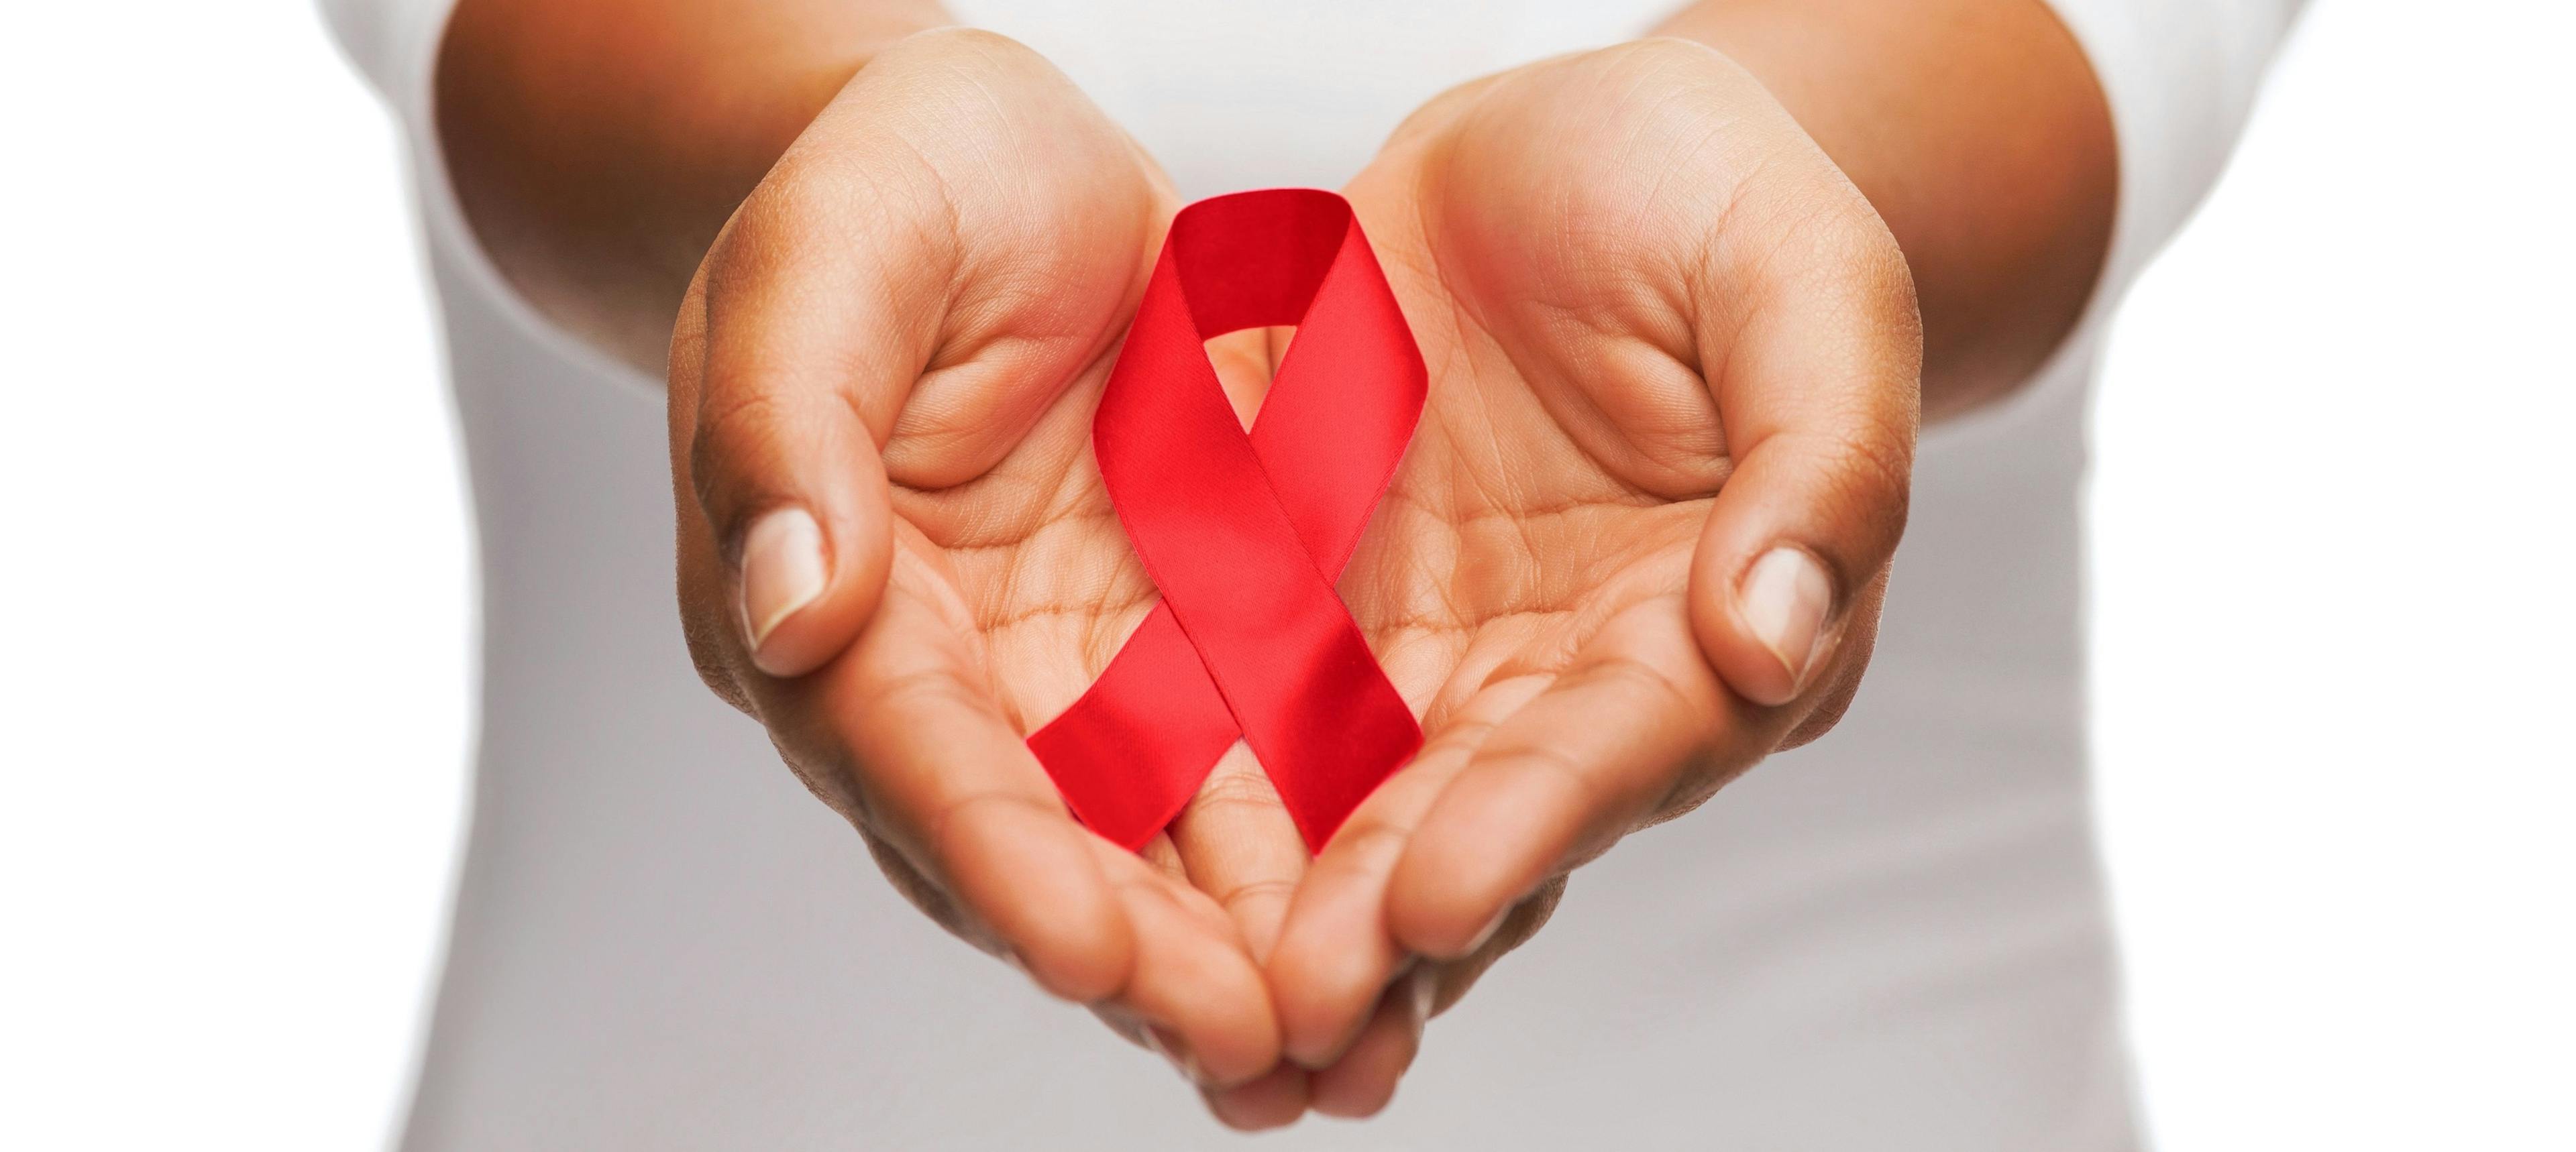 Hands holding HIV/AIDS awareness ribbon | Image credit: Syda Productions - stock.adobe.com